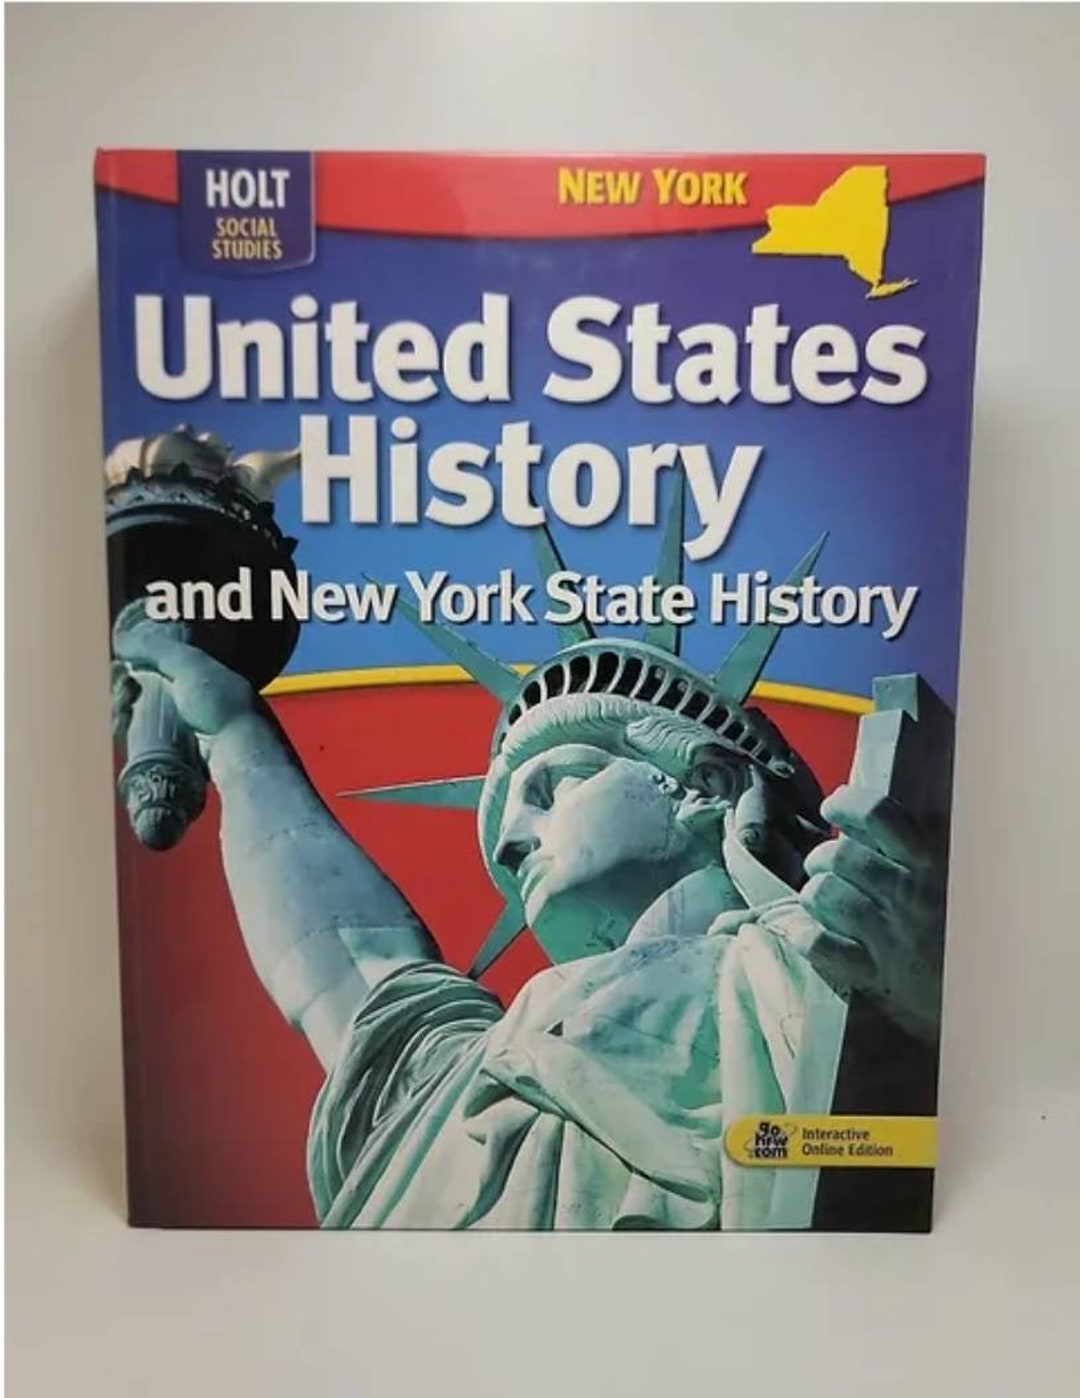 States　Buy　Online　in　India　United　Holt　Student　C　Edition　Mcdougal　Etsy　History　2009: